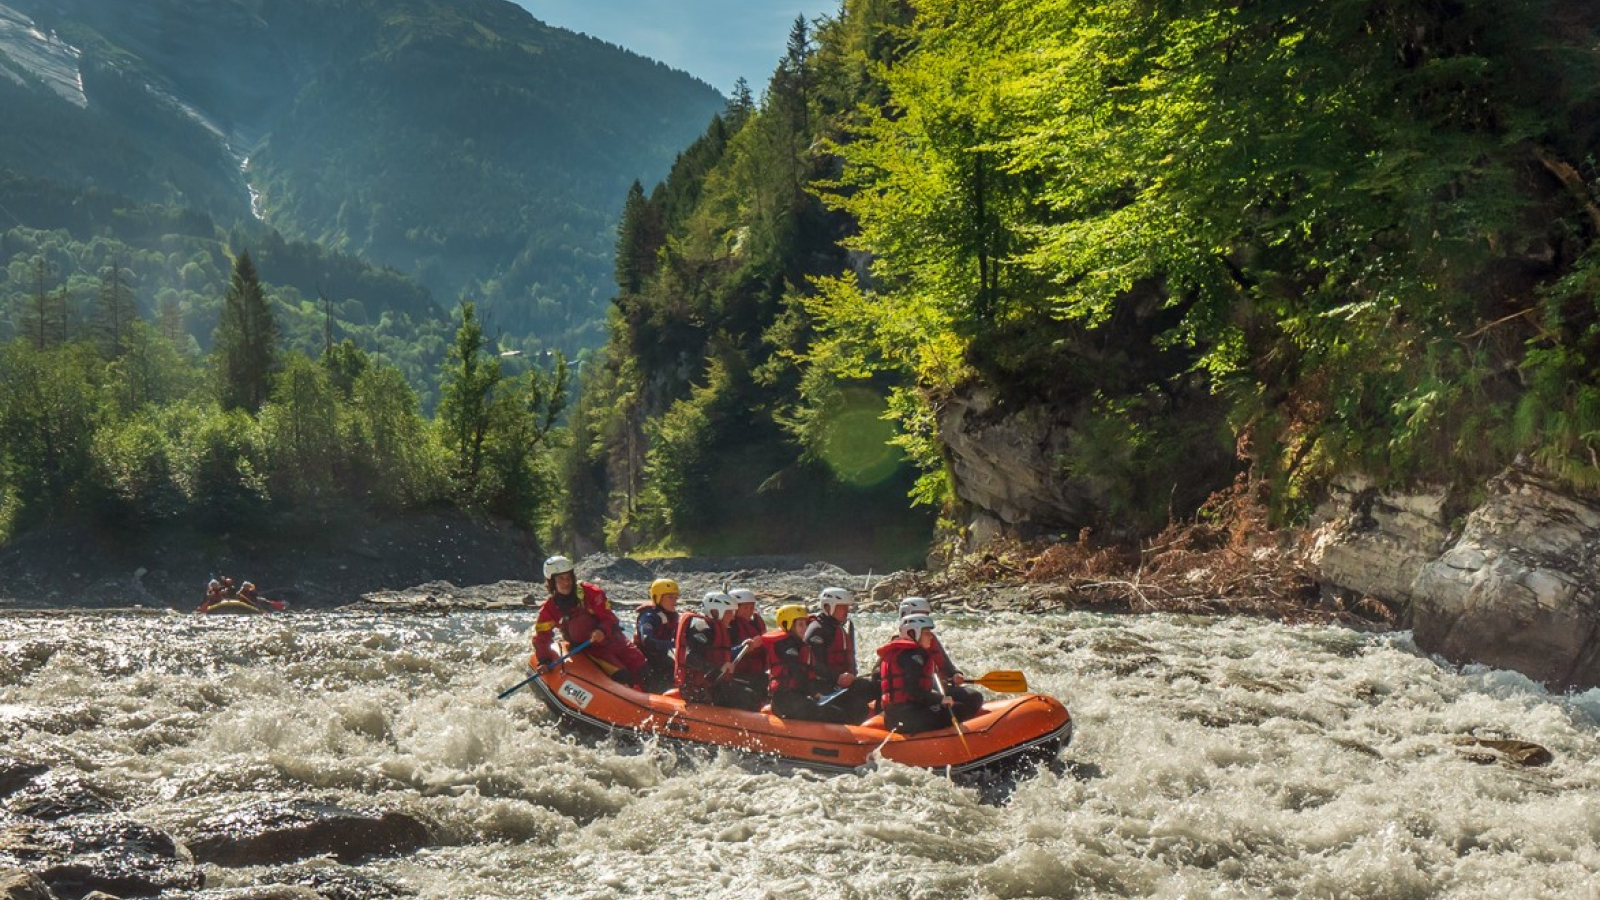 Gorges des Tines rafting